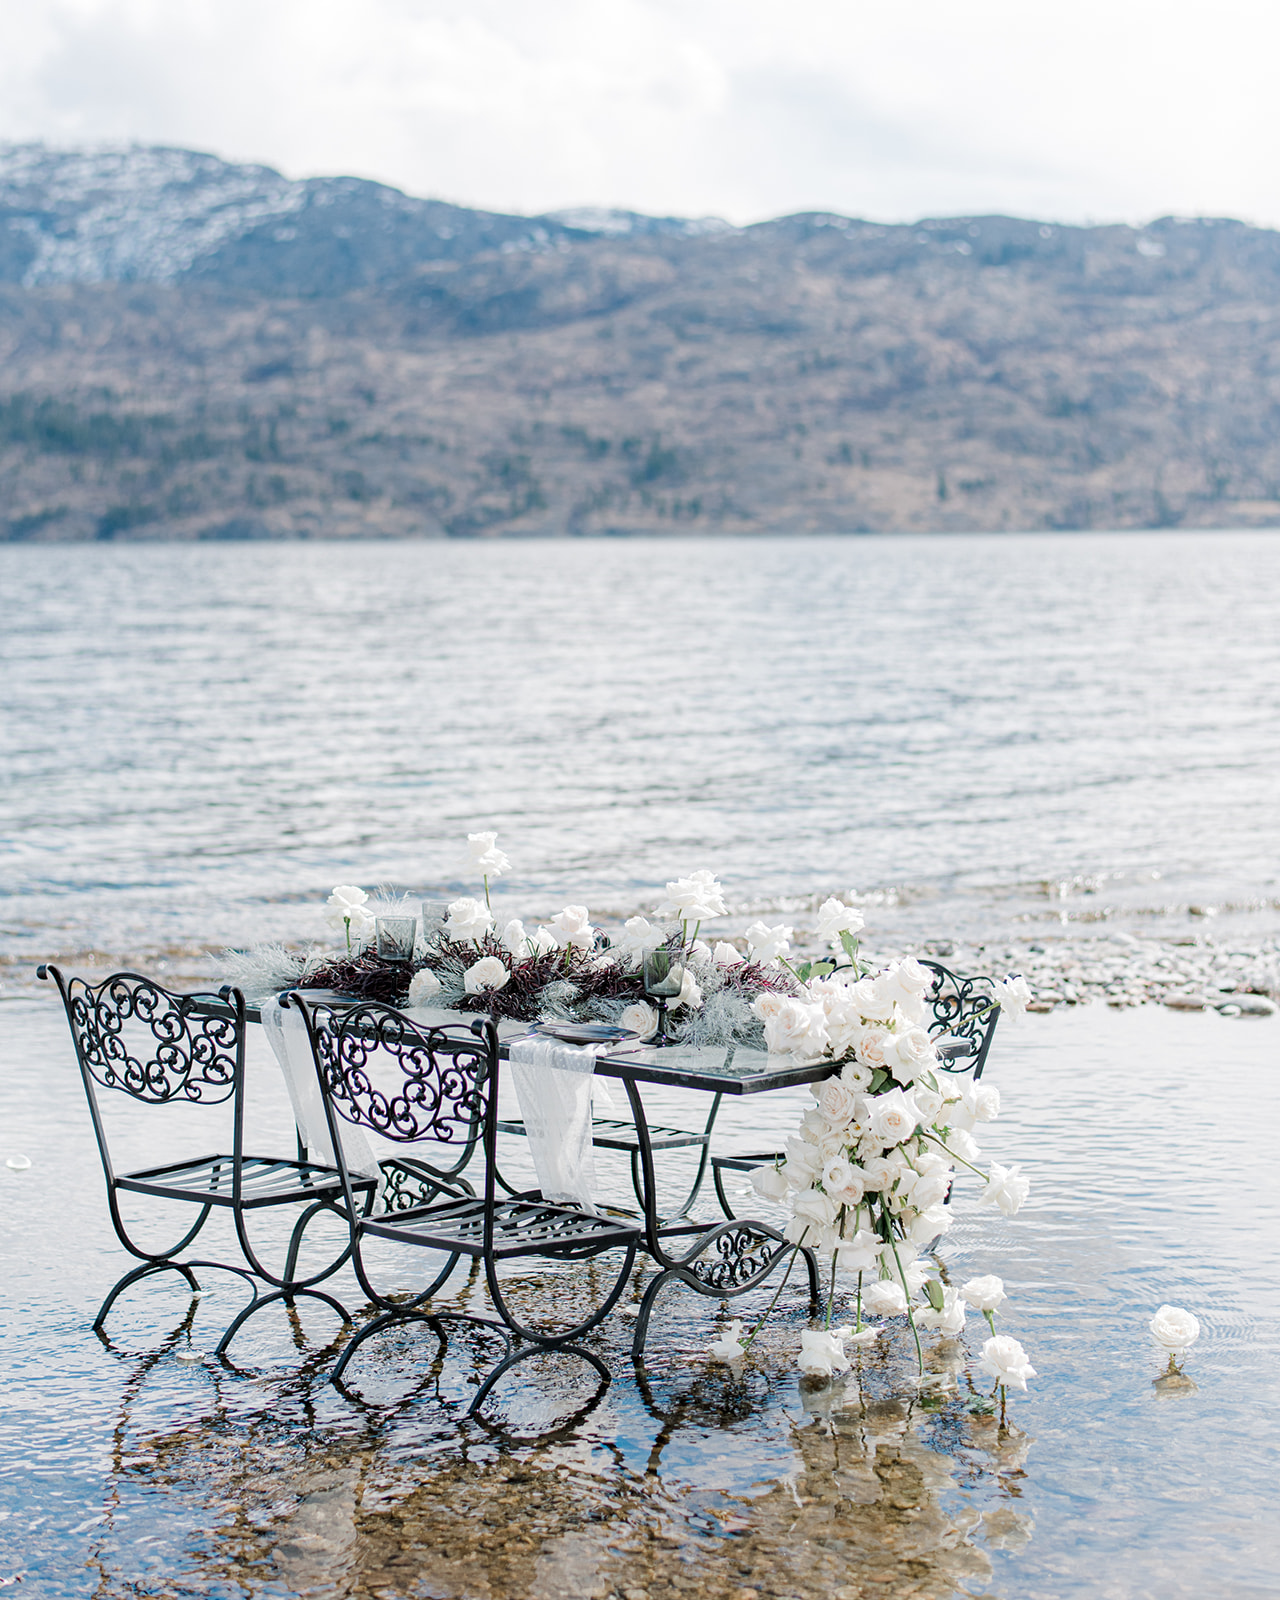 Intimate table setting outdoors in Peachland, BC, coastal chic wedding inspiration with the majestic backdrop of the Canadian Rockies. Tablescape adorned with stunning florals by JAM Florals.